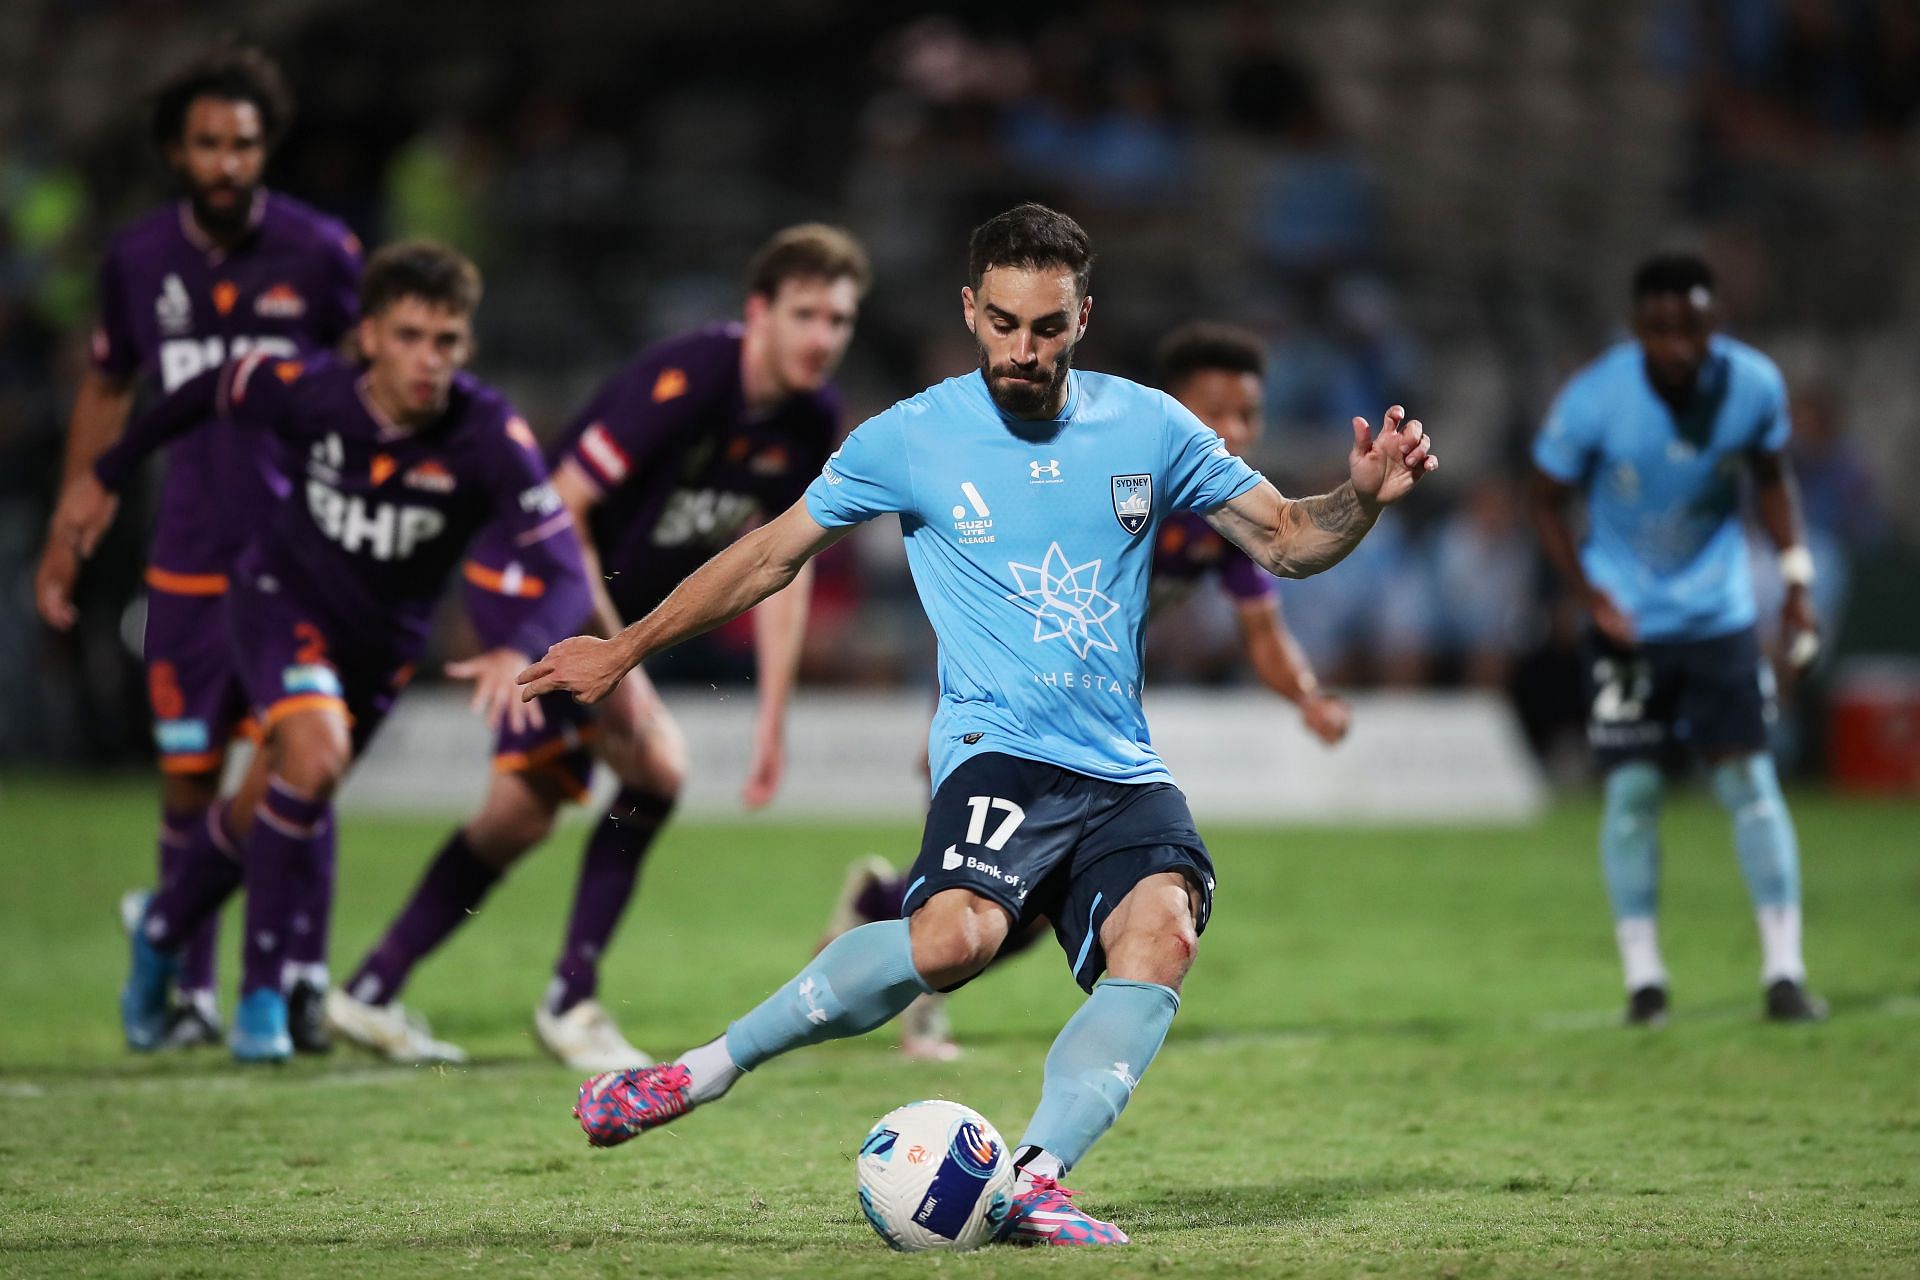 Sydney FC take on Perth Glory this weekend